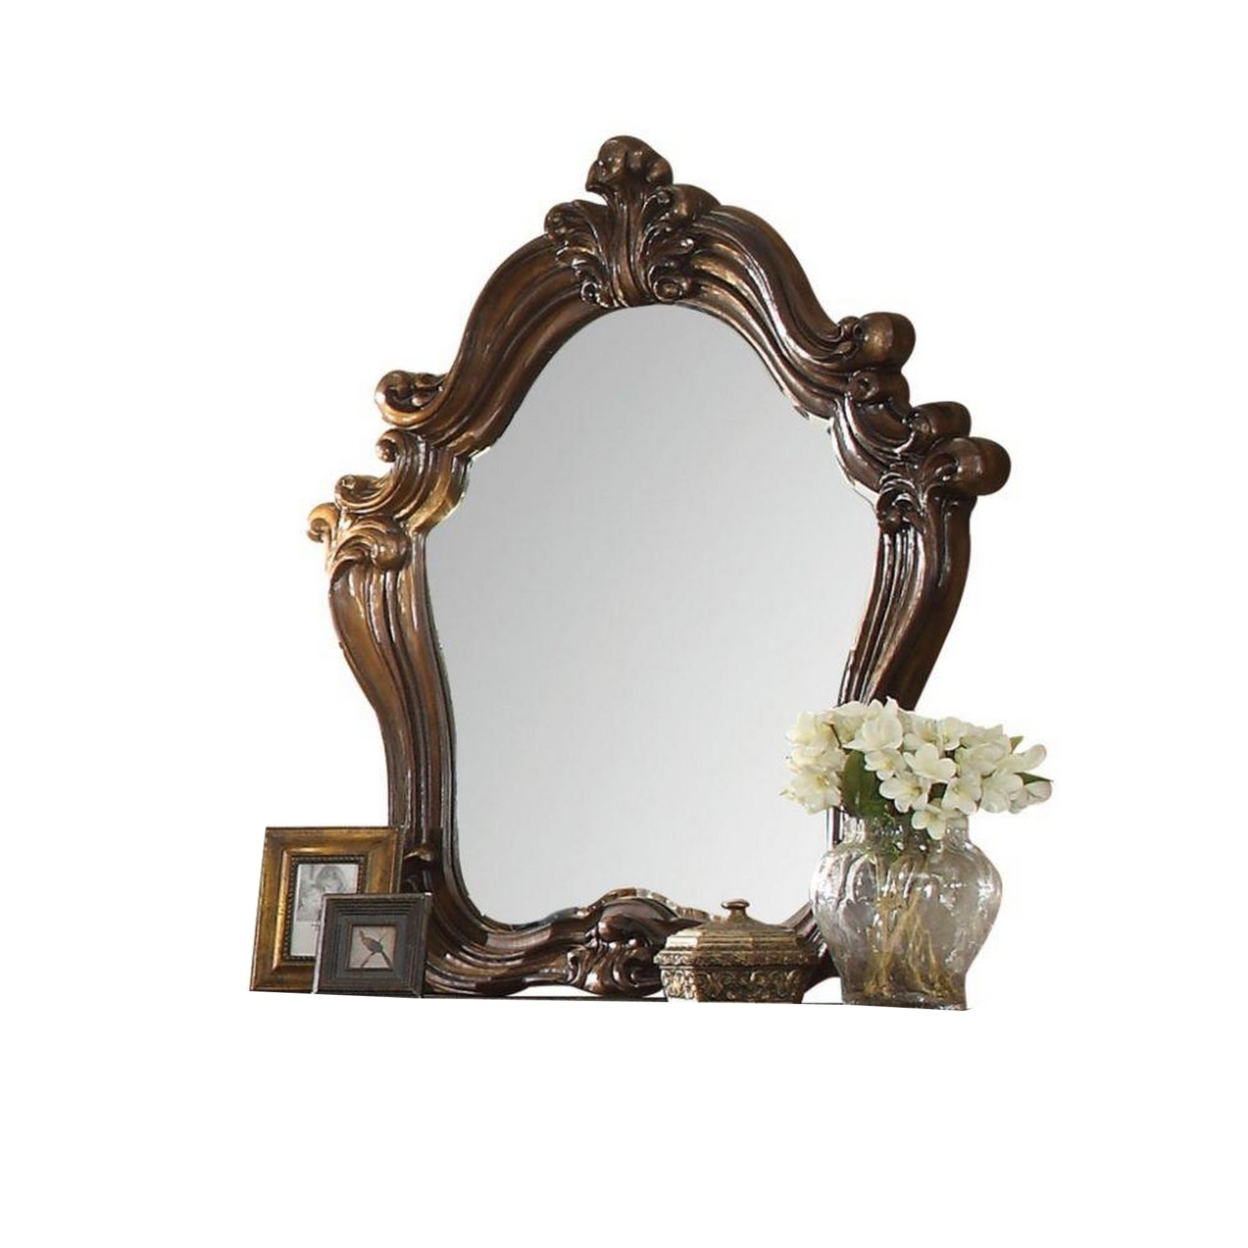 Scroll And Molded Wooden Mirror With Carved Details, Cherry Brown- Saltoro Sherpi